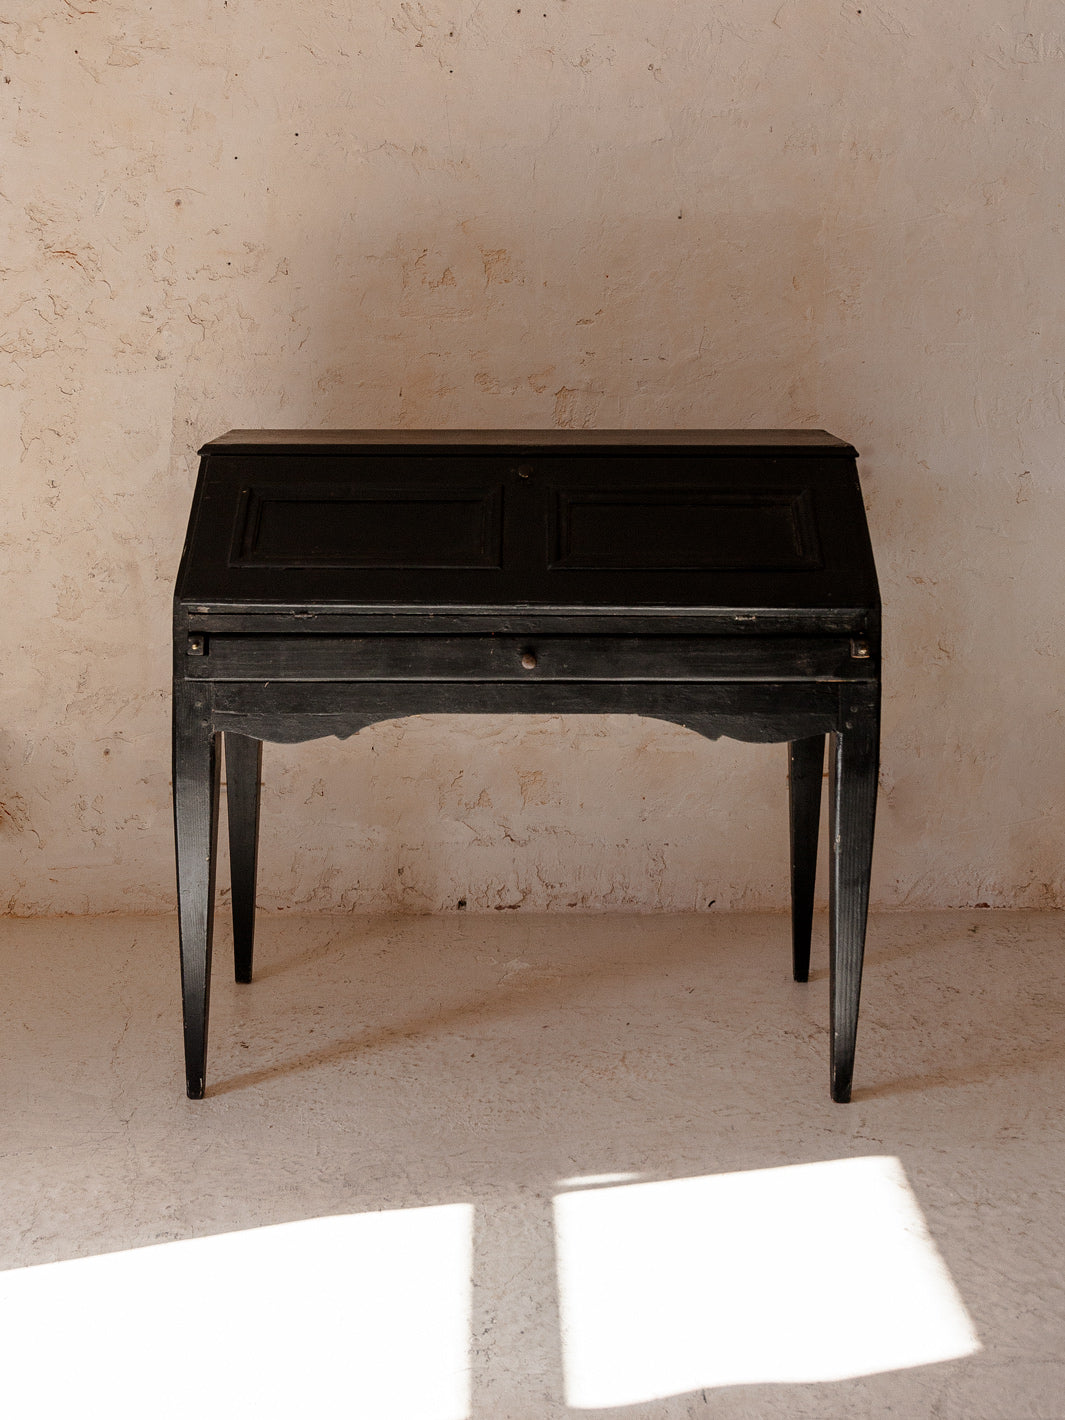 Black French desk and XIX tile